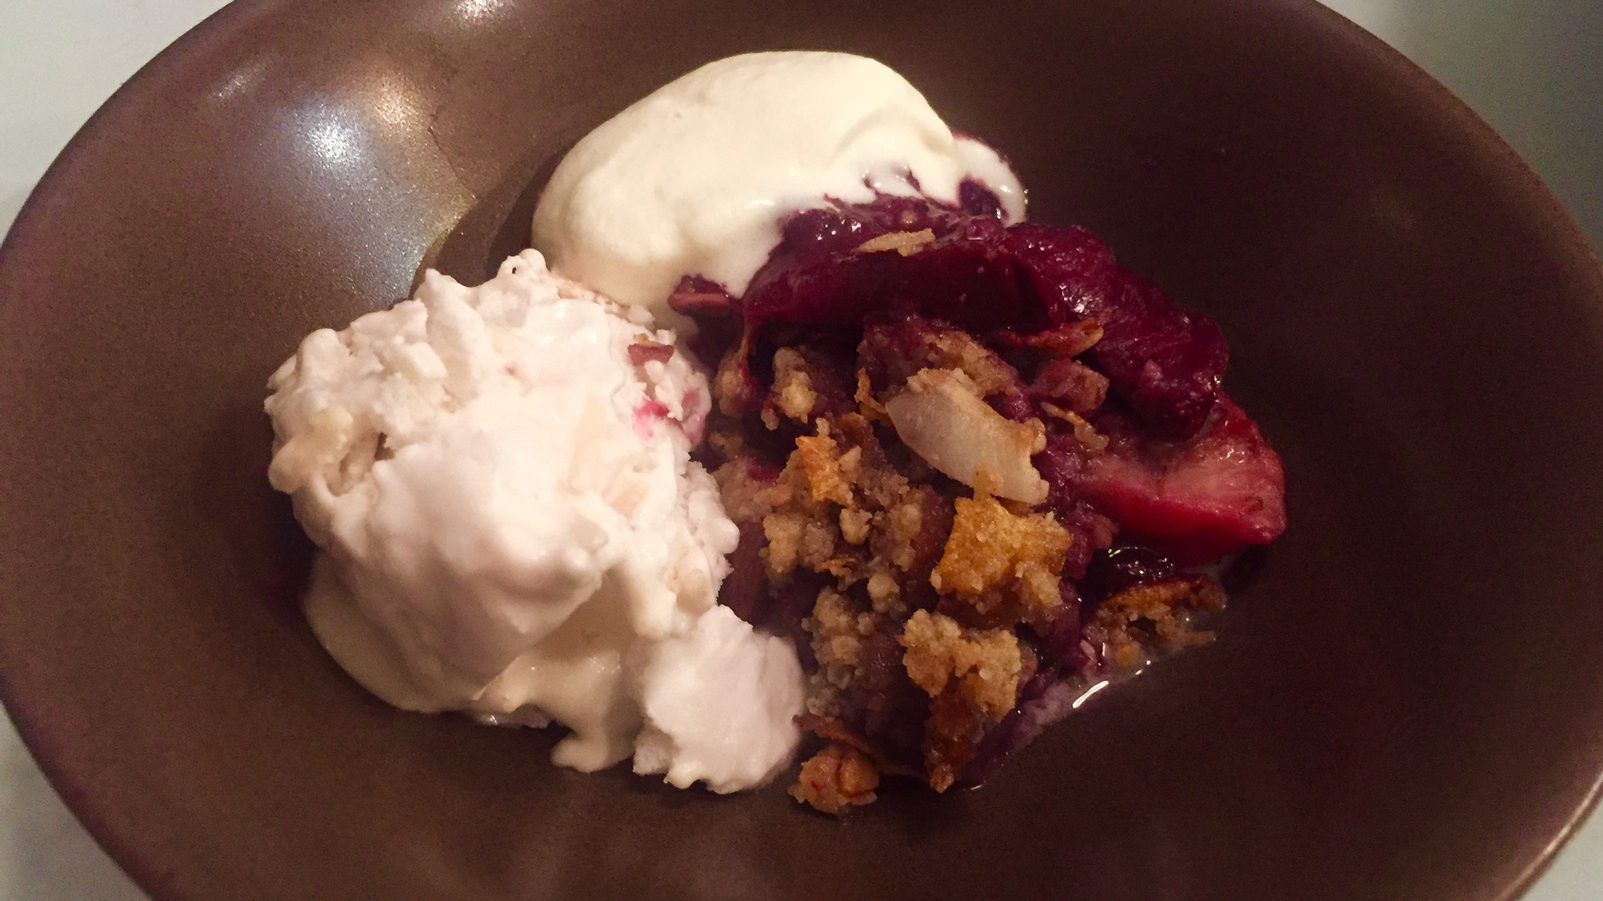 Plum crumble and white ice cream on brown bowl.